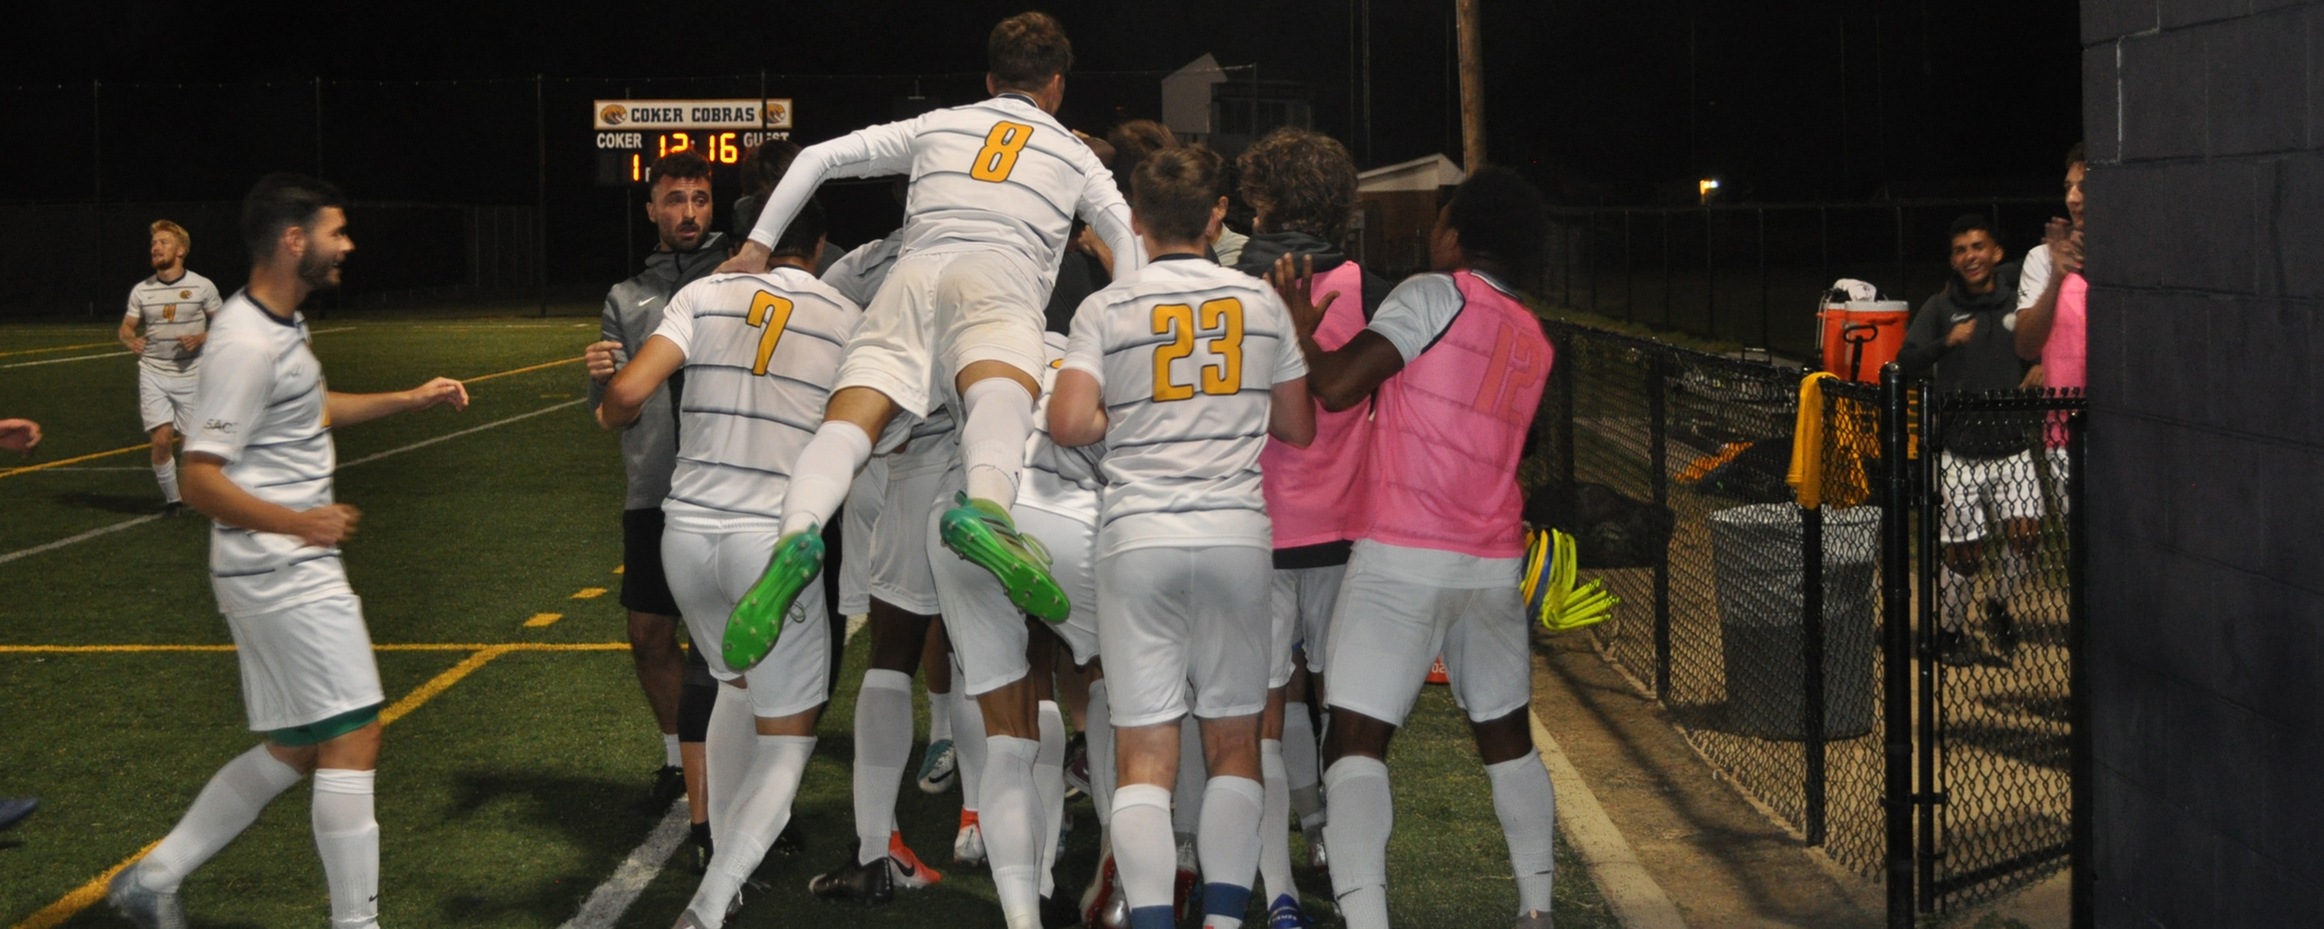 Coker Men's Soccer Ranked Fourth in Southeast, Receives National Votes in Latest United Soccer Coaches Poll